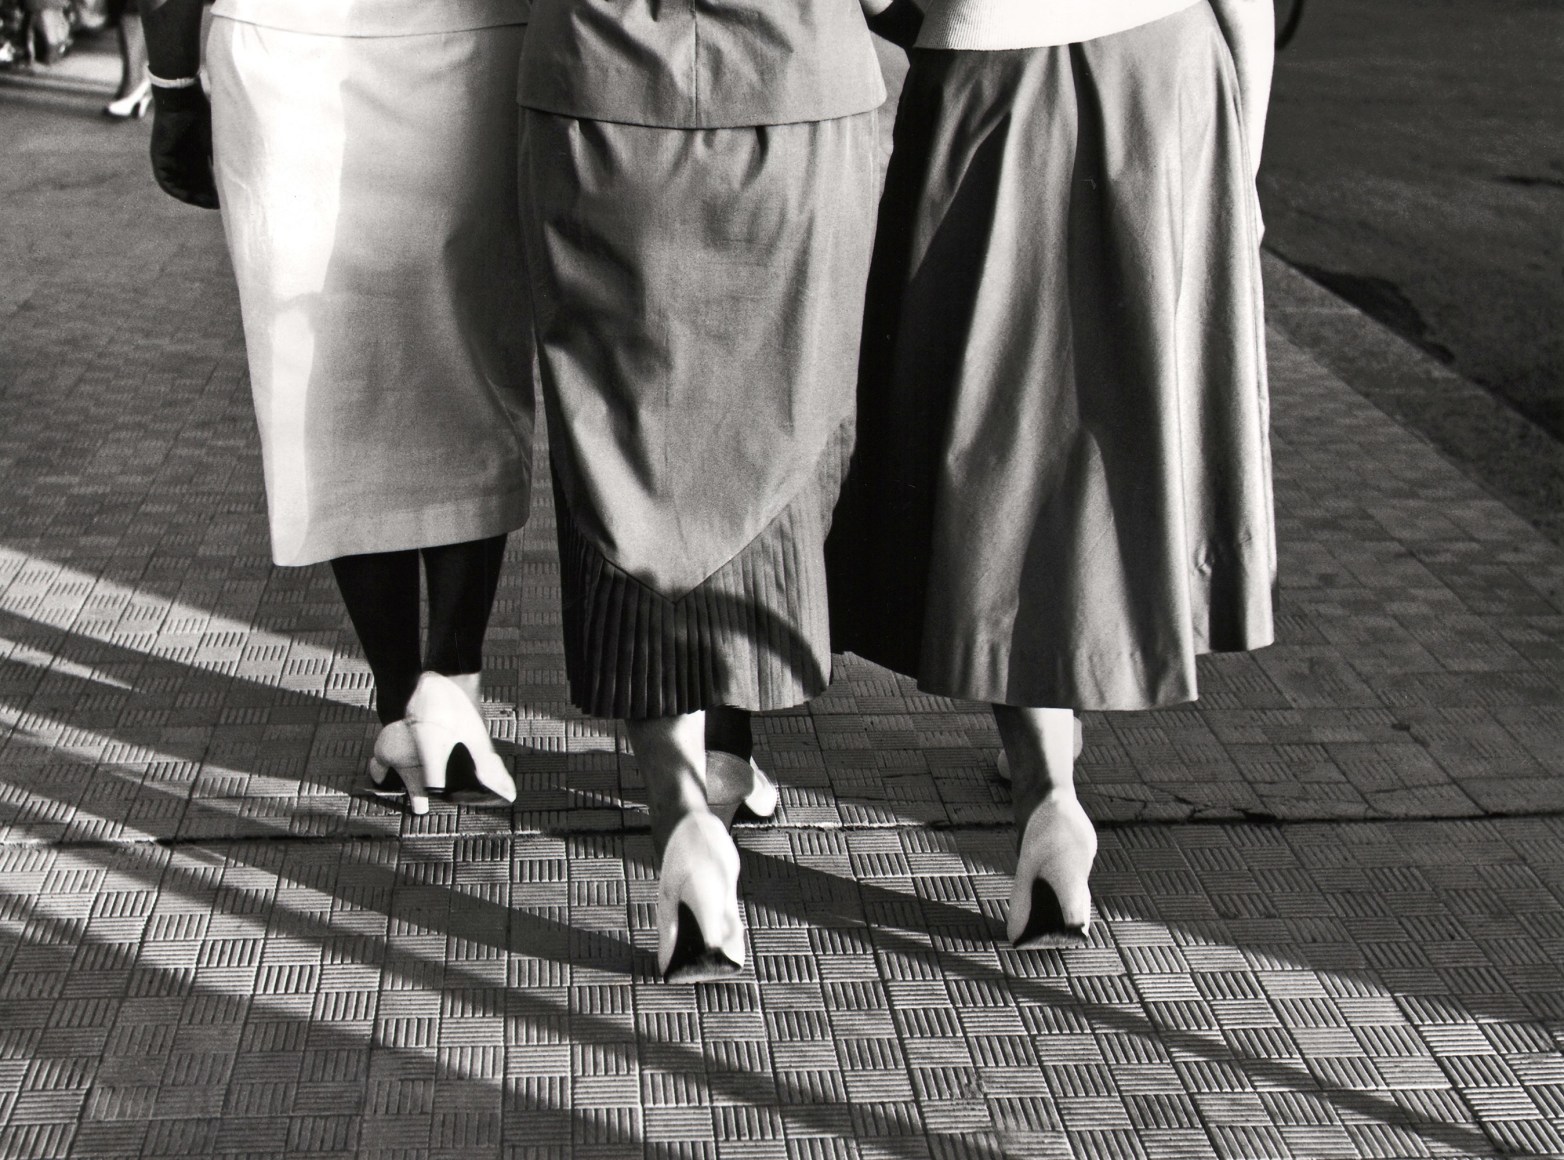 Nino Migliori, White Shoes, 1951. Three women photographed from behind from the waist down in matching white heels.